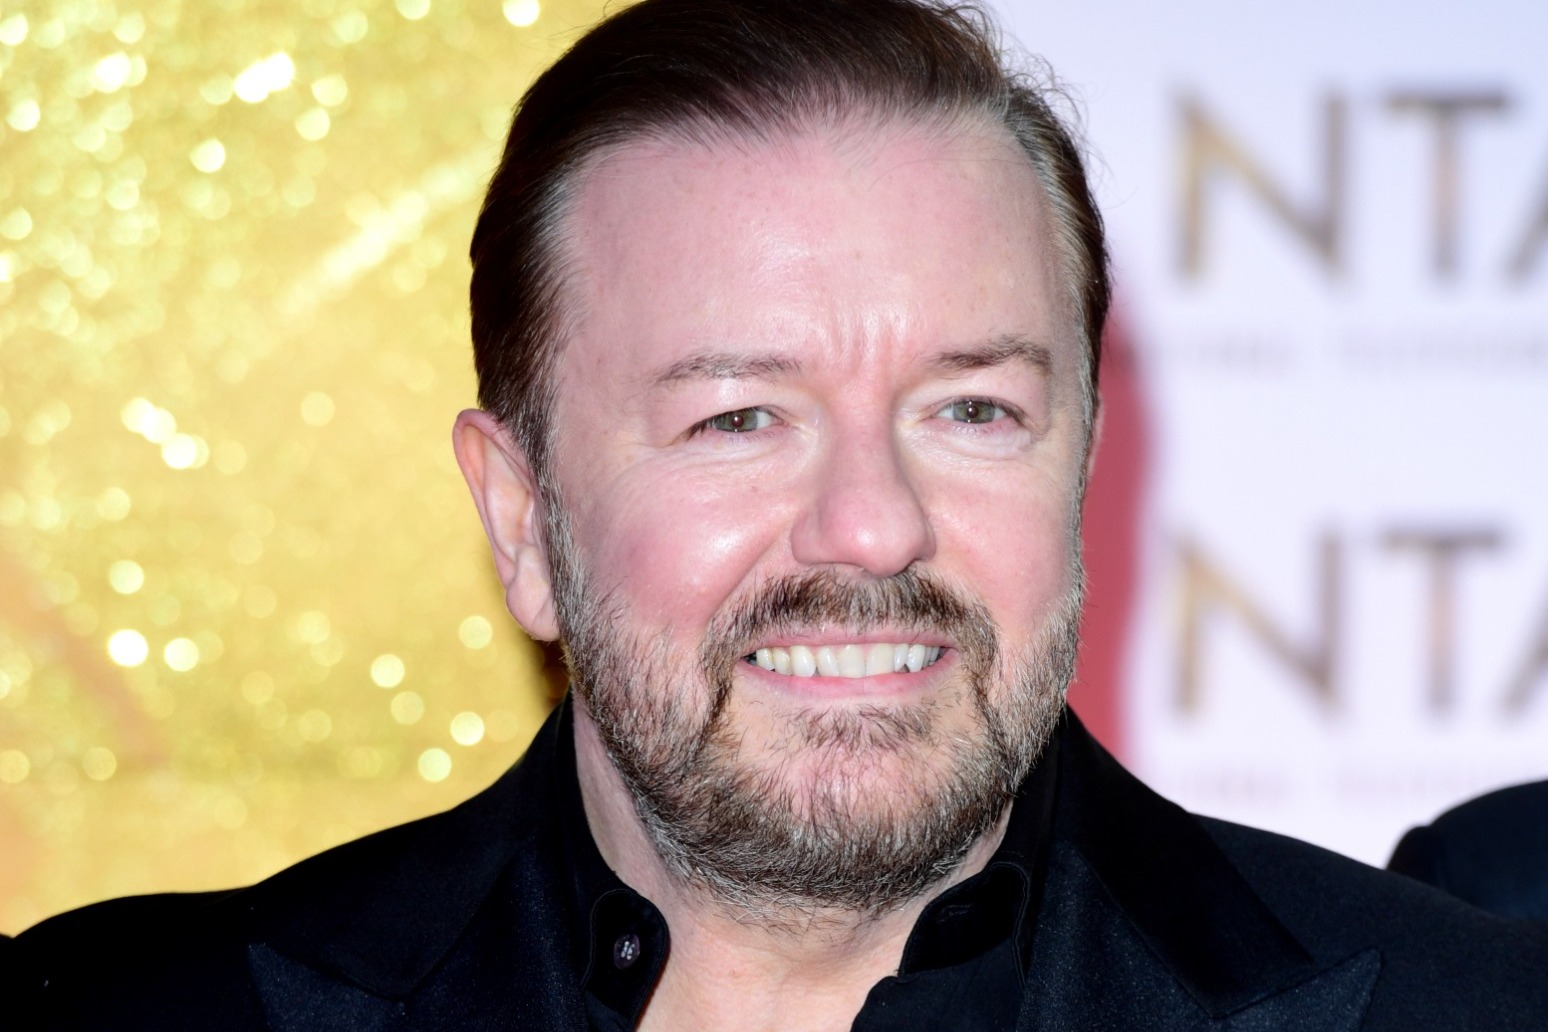 Ricky Gervais endorses ‘wonderful’ wildlife book about bears 